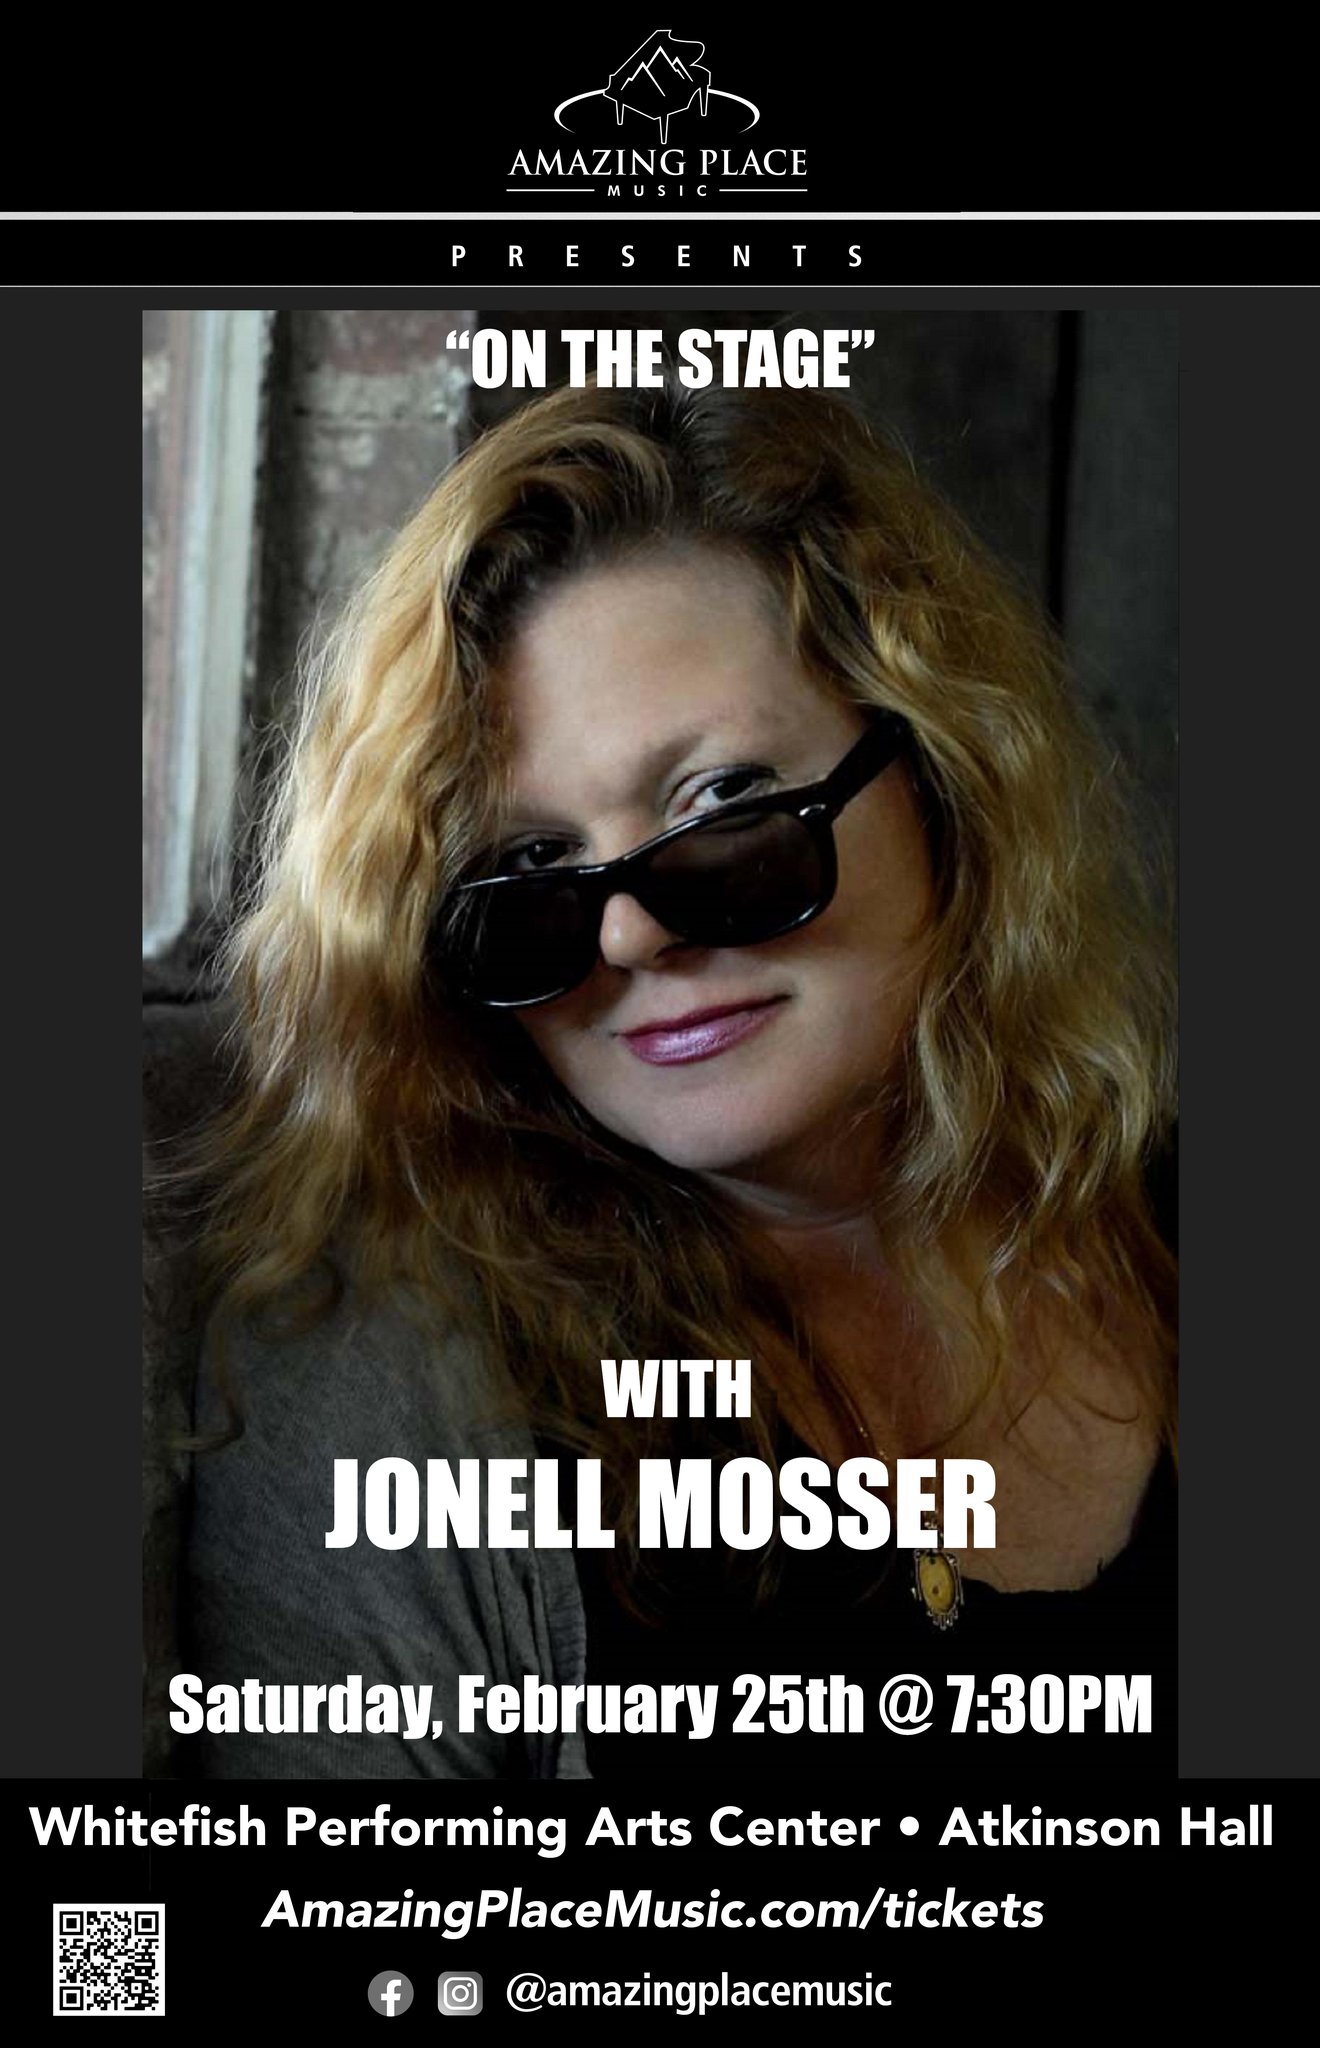 Jonell Mosser at Whitefish Performing Arts Center on Saturday, February 25, 2023